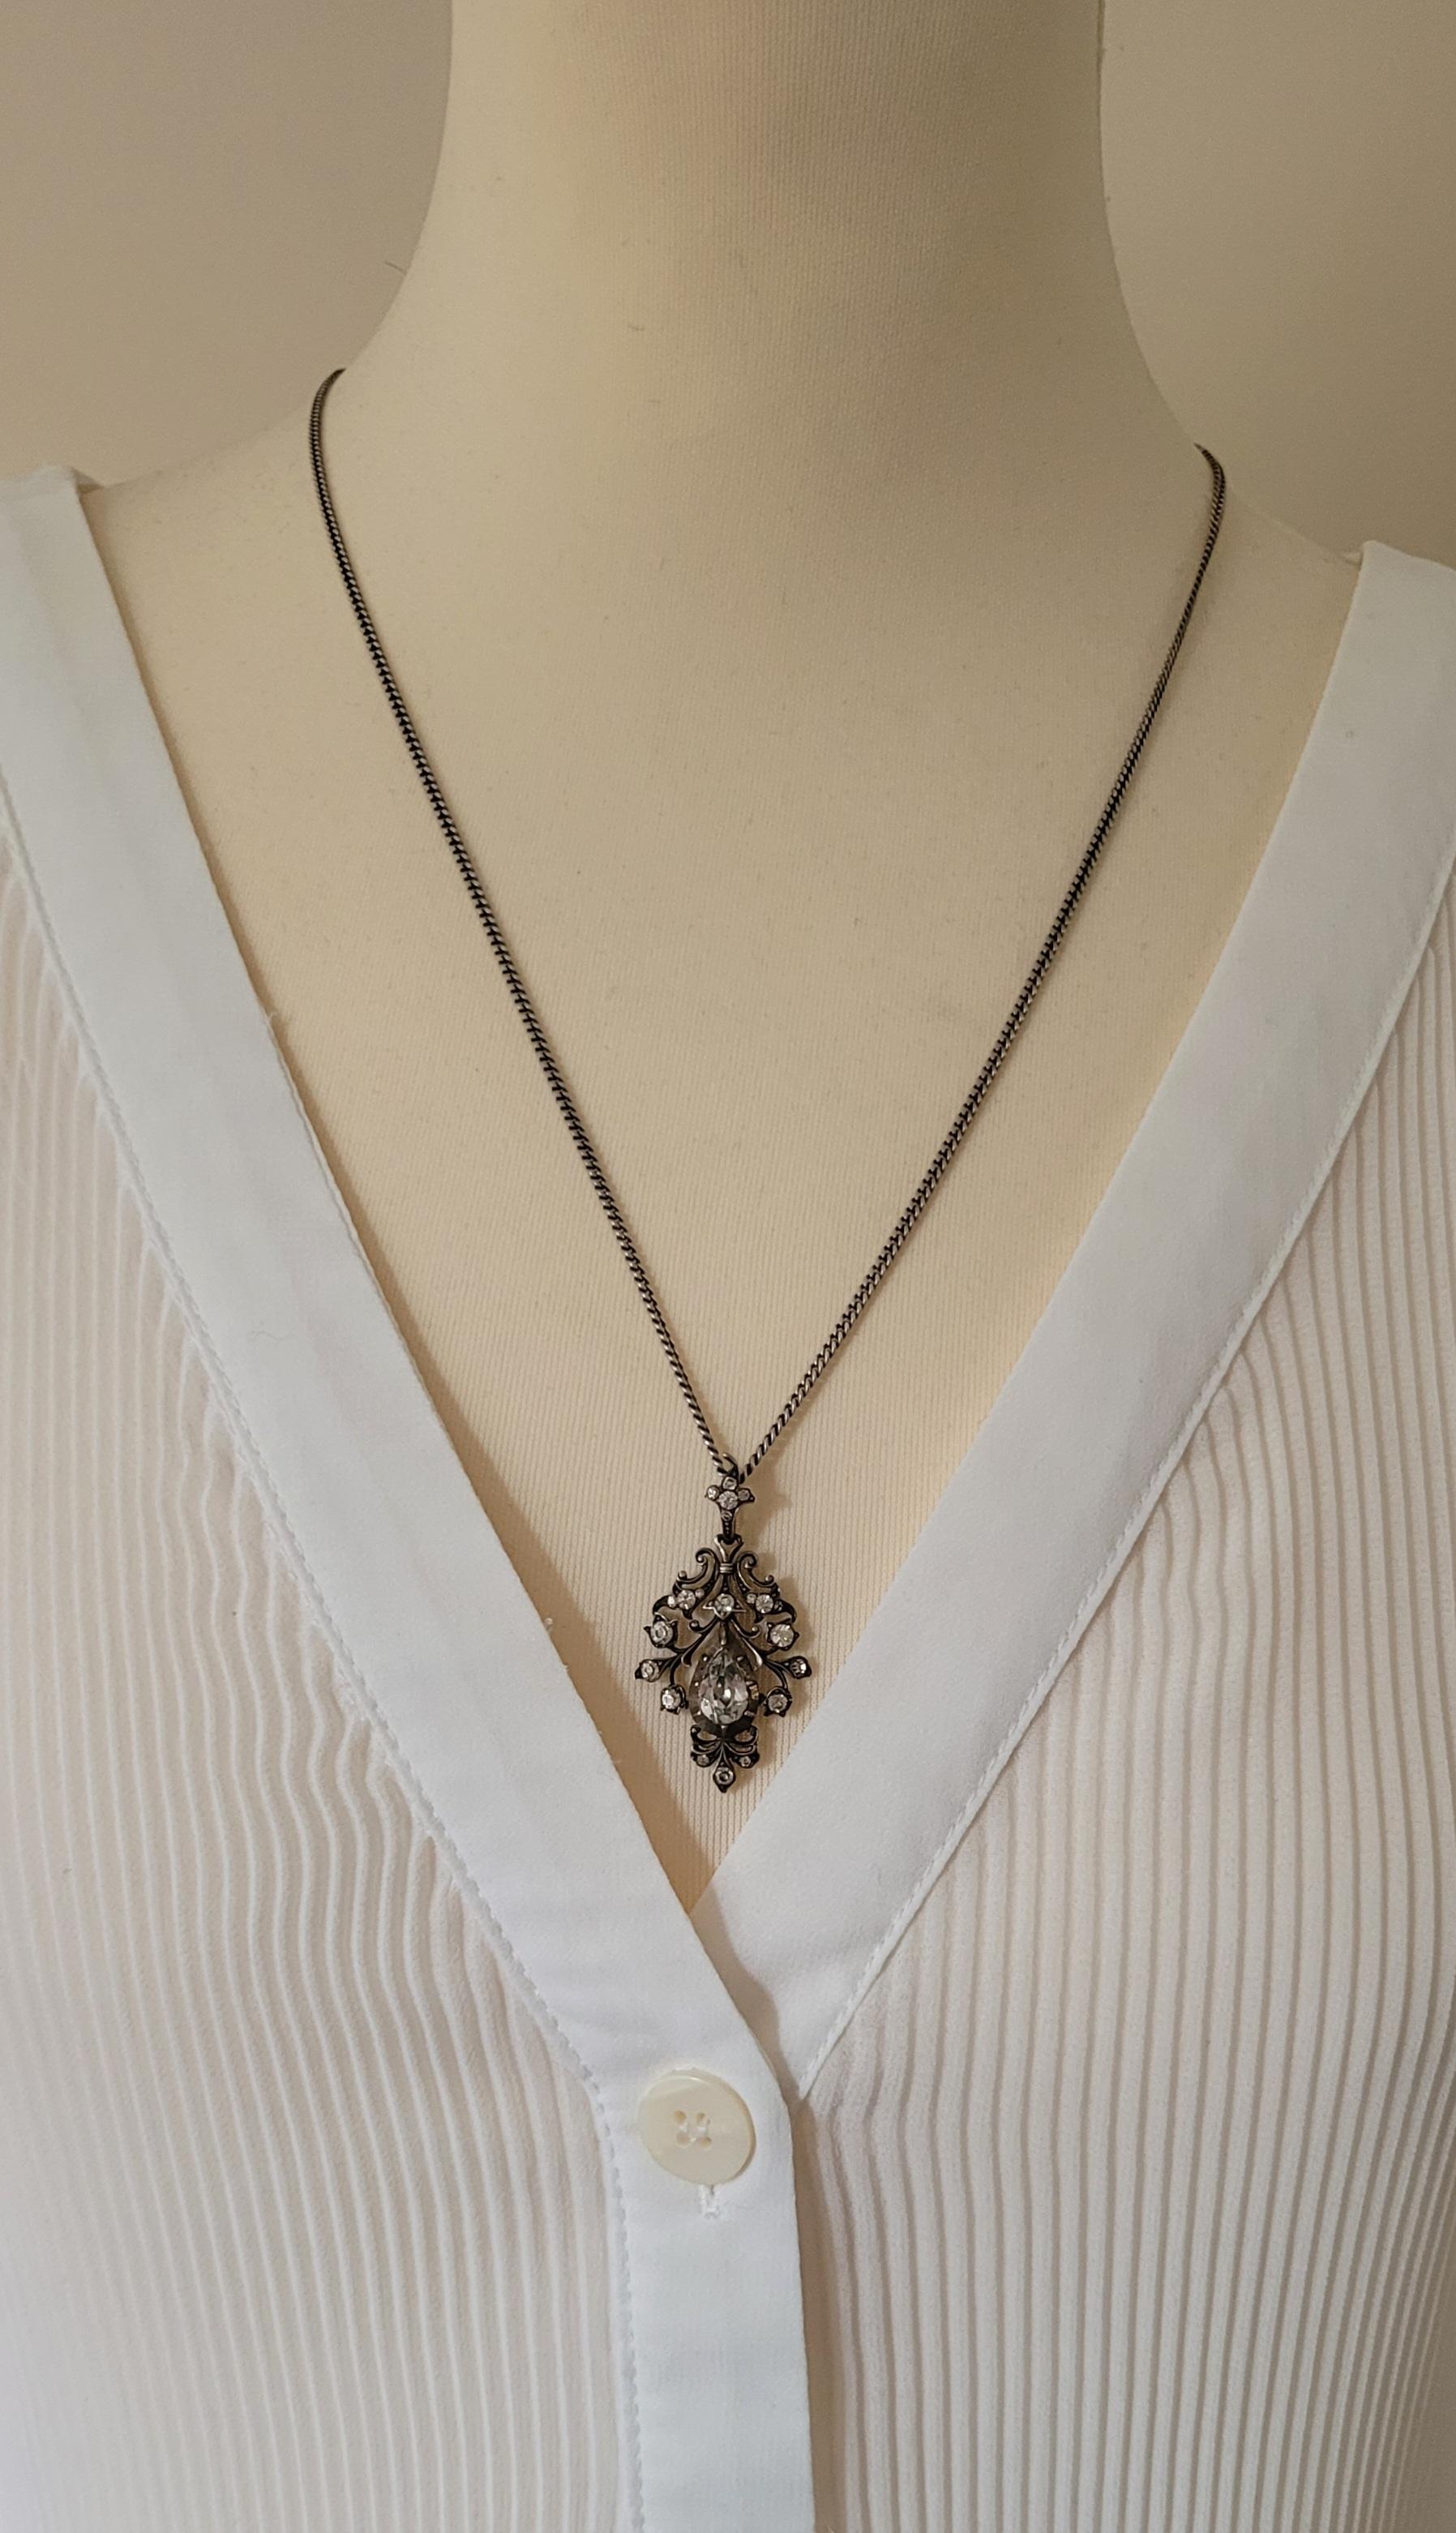 This sterling silver and paste drop pendant is a stunning piece from the late 1800s or early 1900s. Crafted in Georgian style, it comes with a late sterling silver chain and stones in a closed back setting. This piece can be worn either on a chain